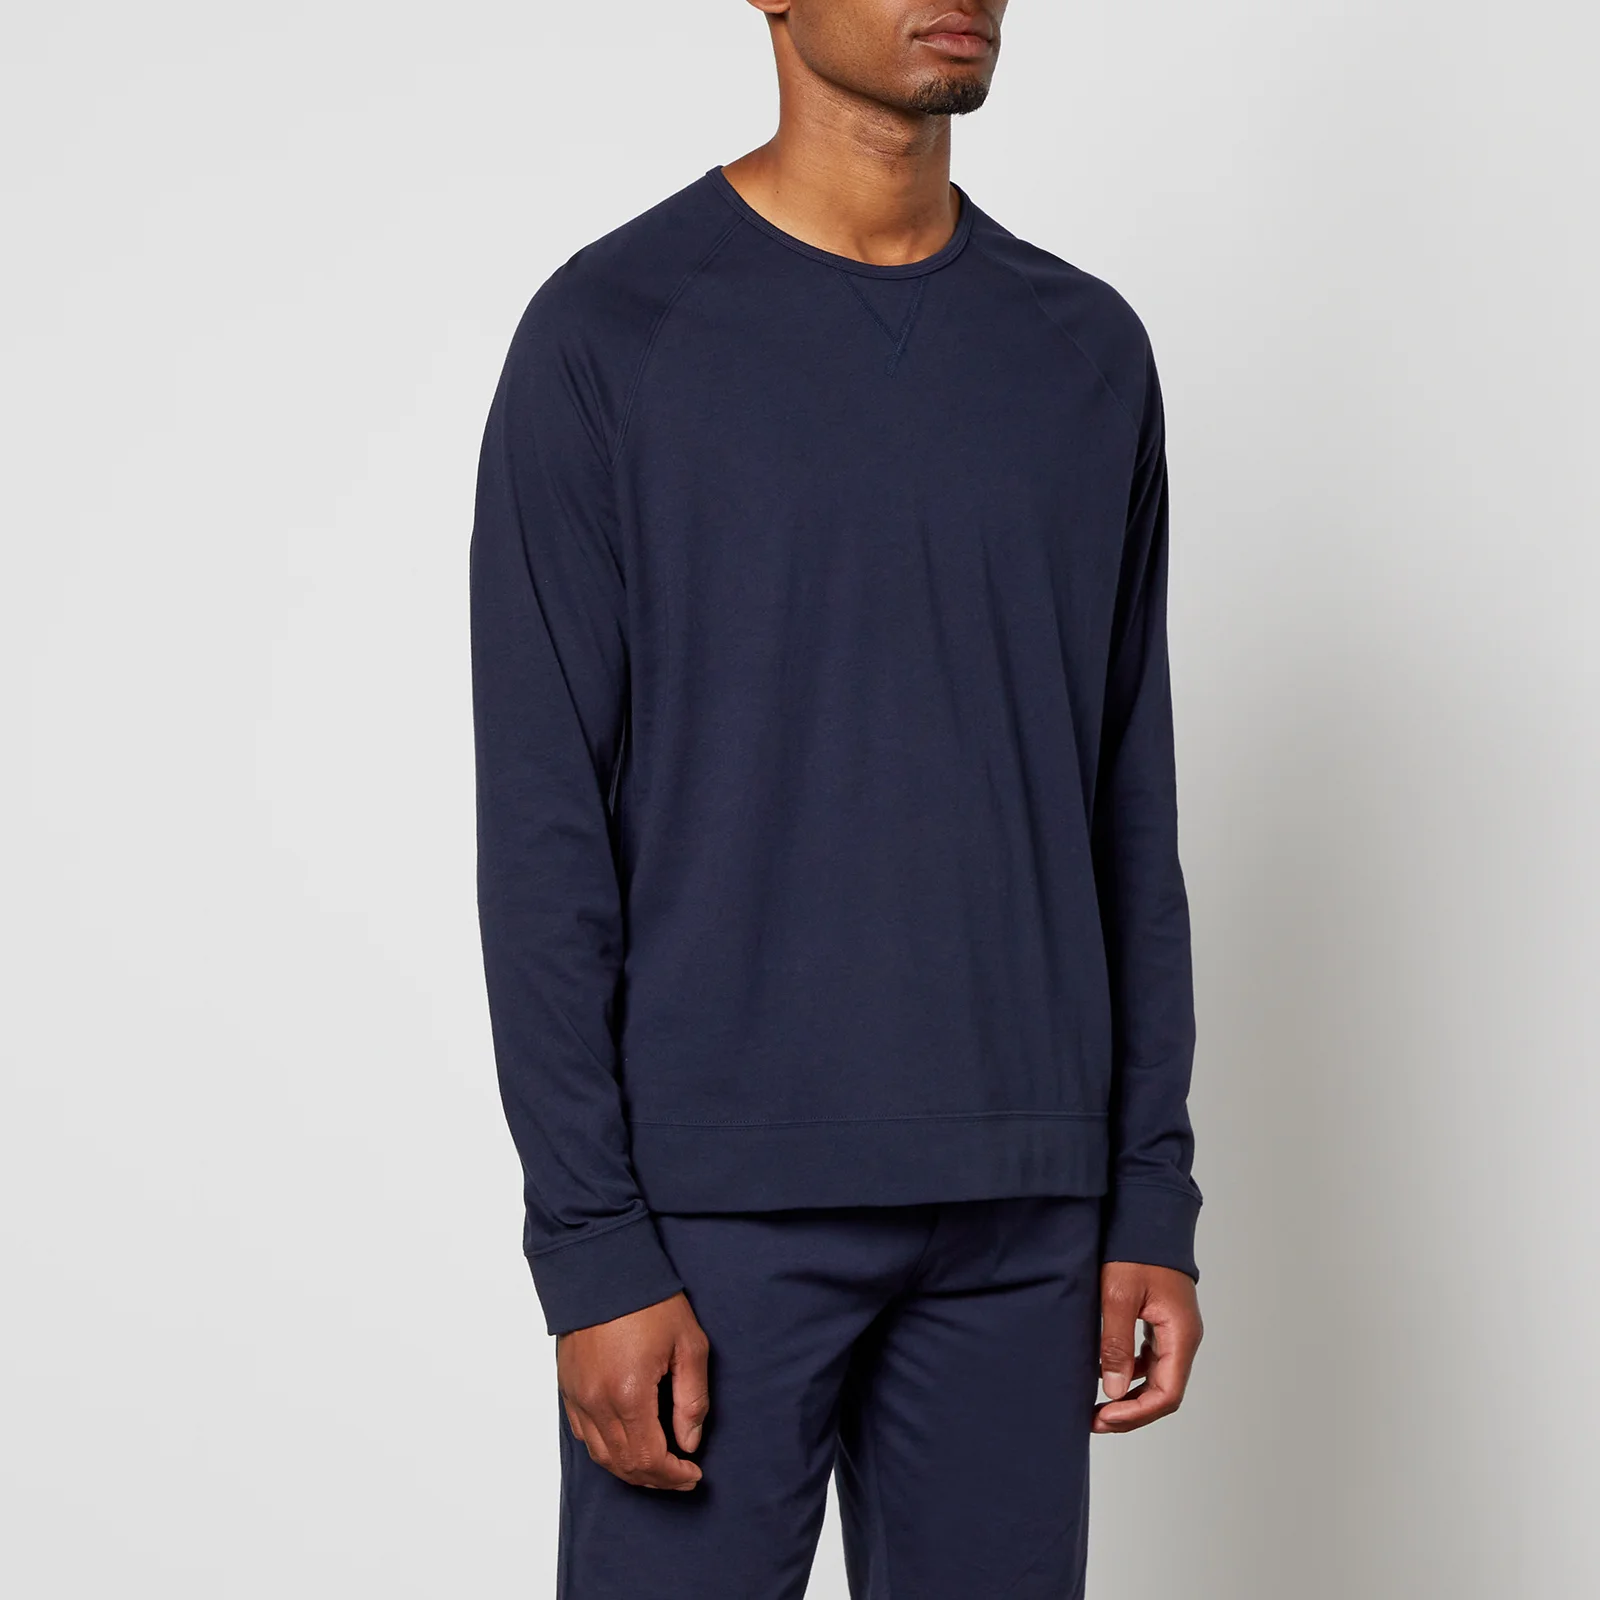 PS Paul Smith Men's Long Sleeve Lounge Top - Inky Blue Image 1